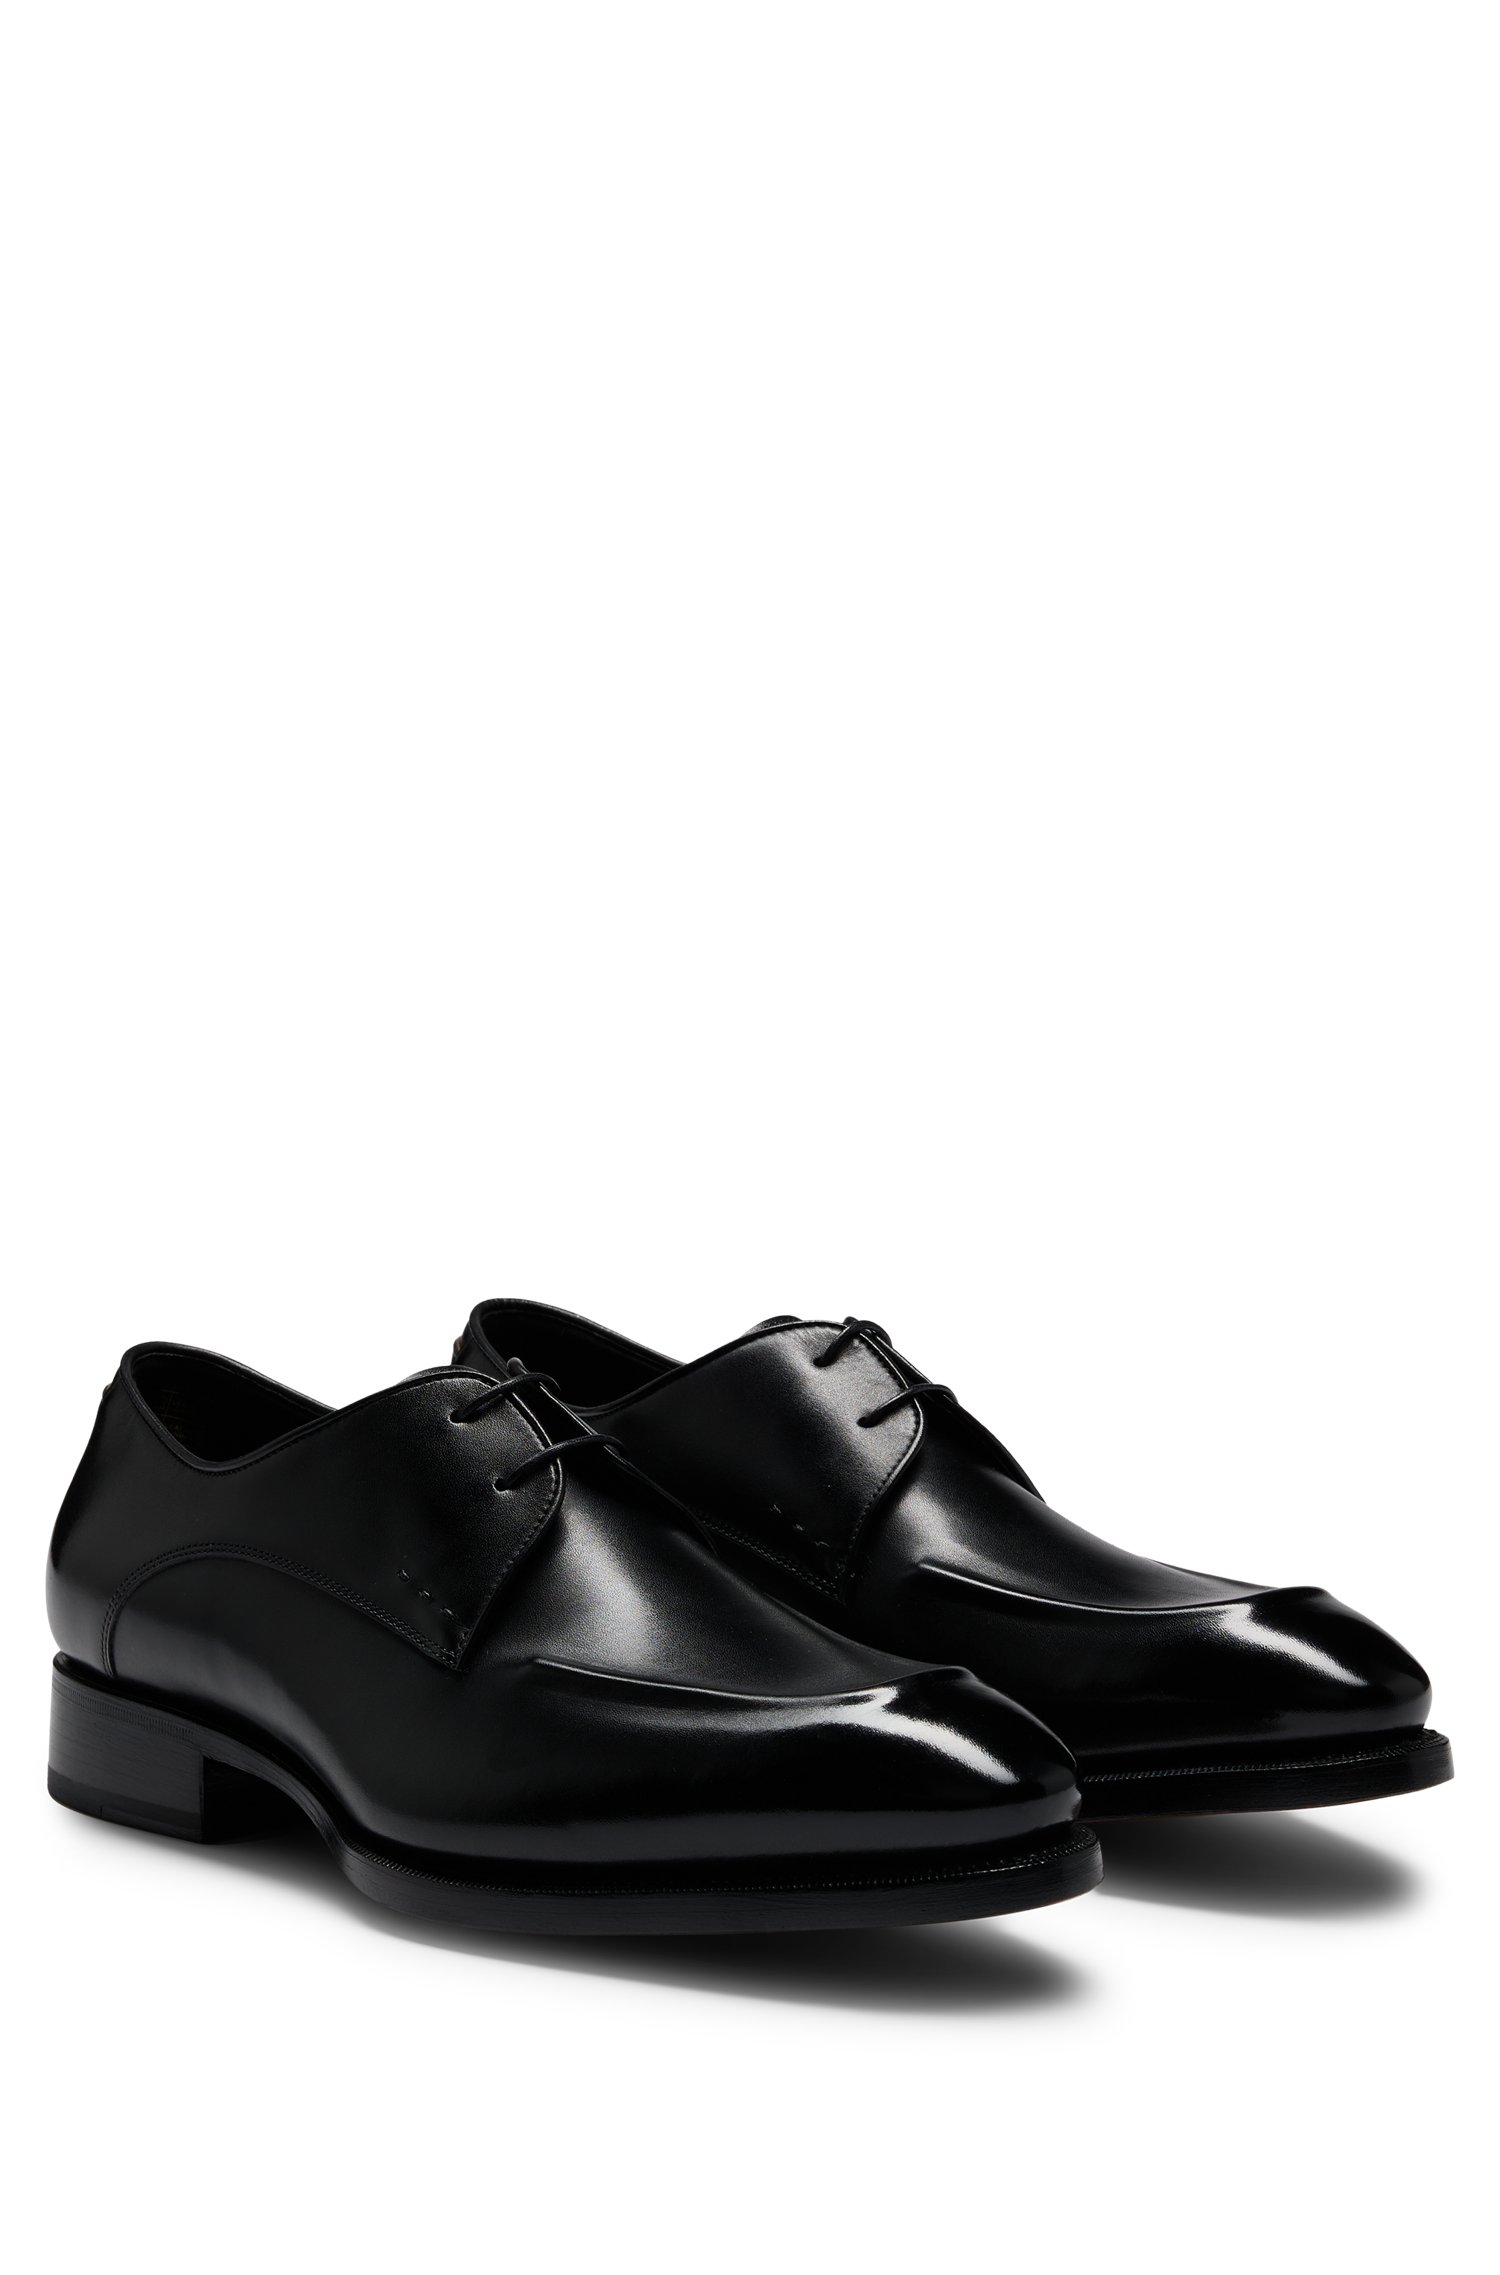 Apron-toe Derby shoes leather with heel detail